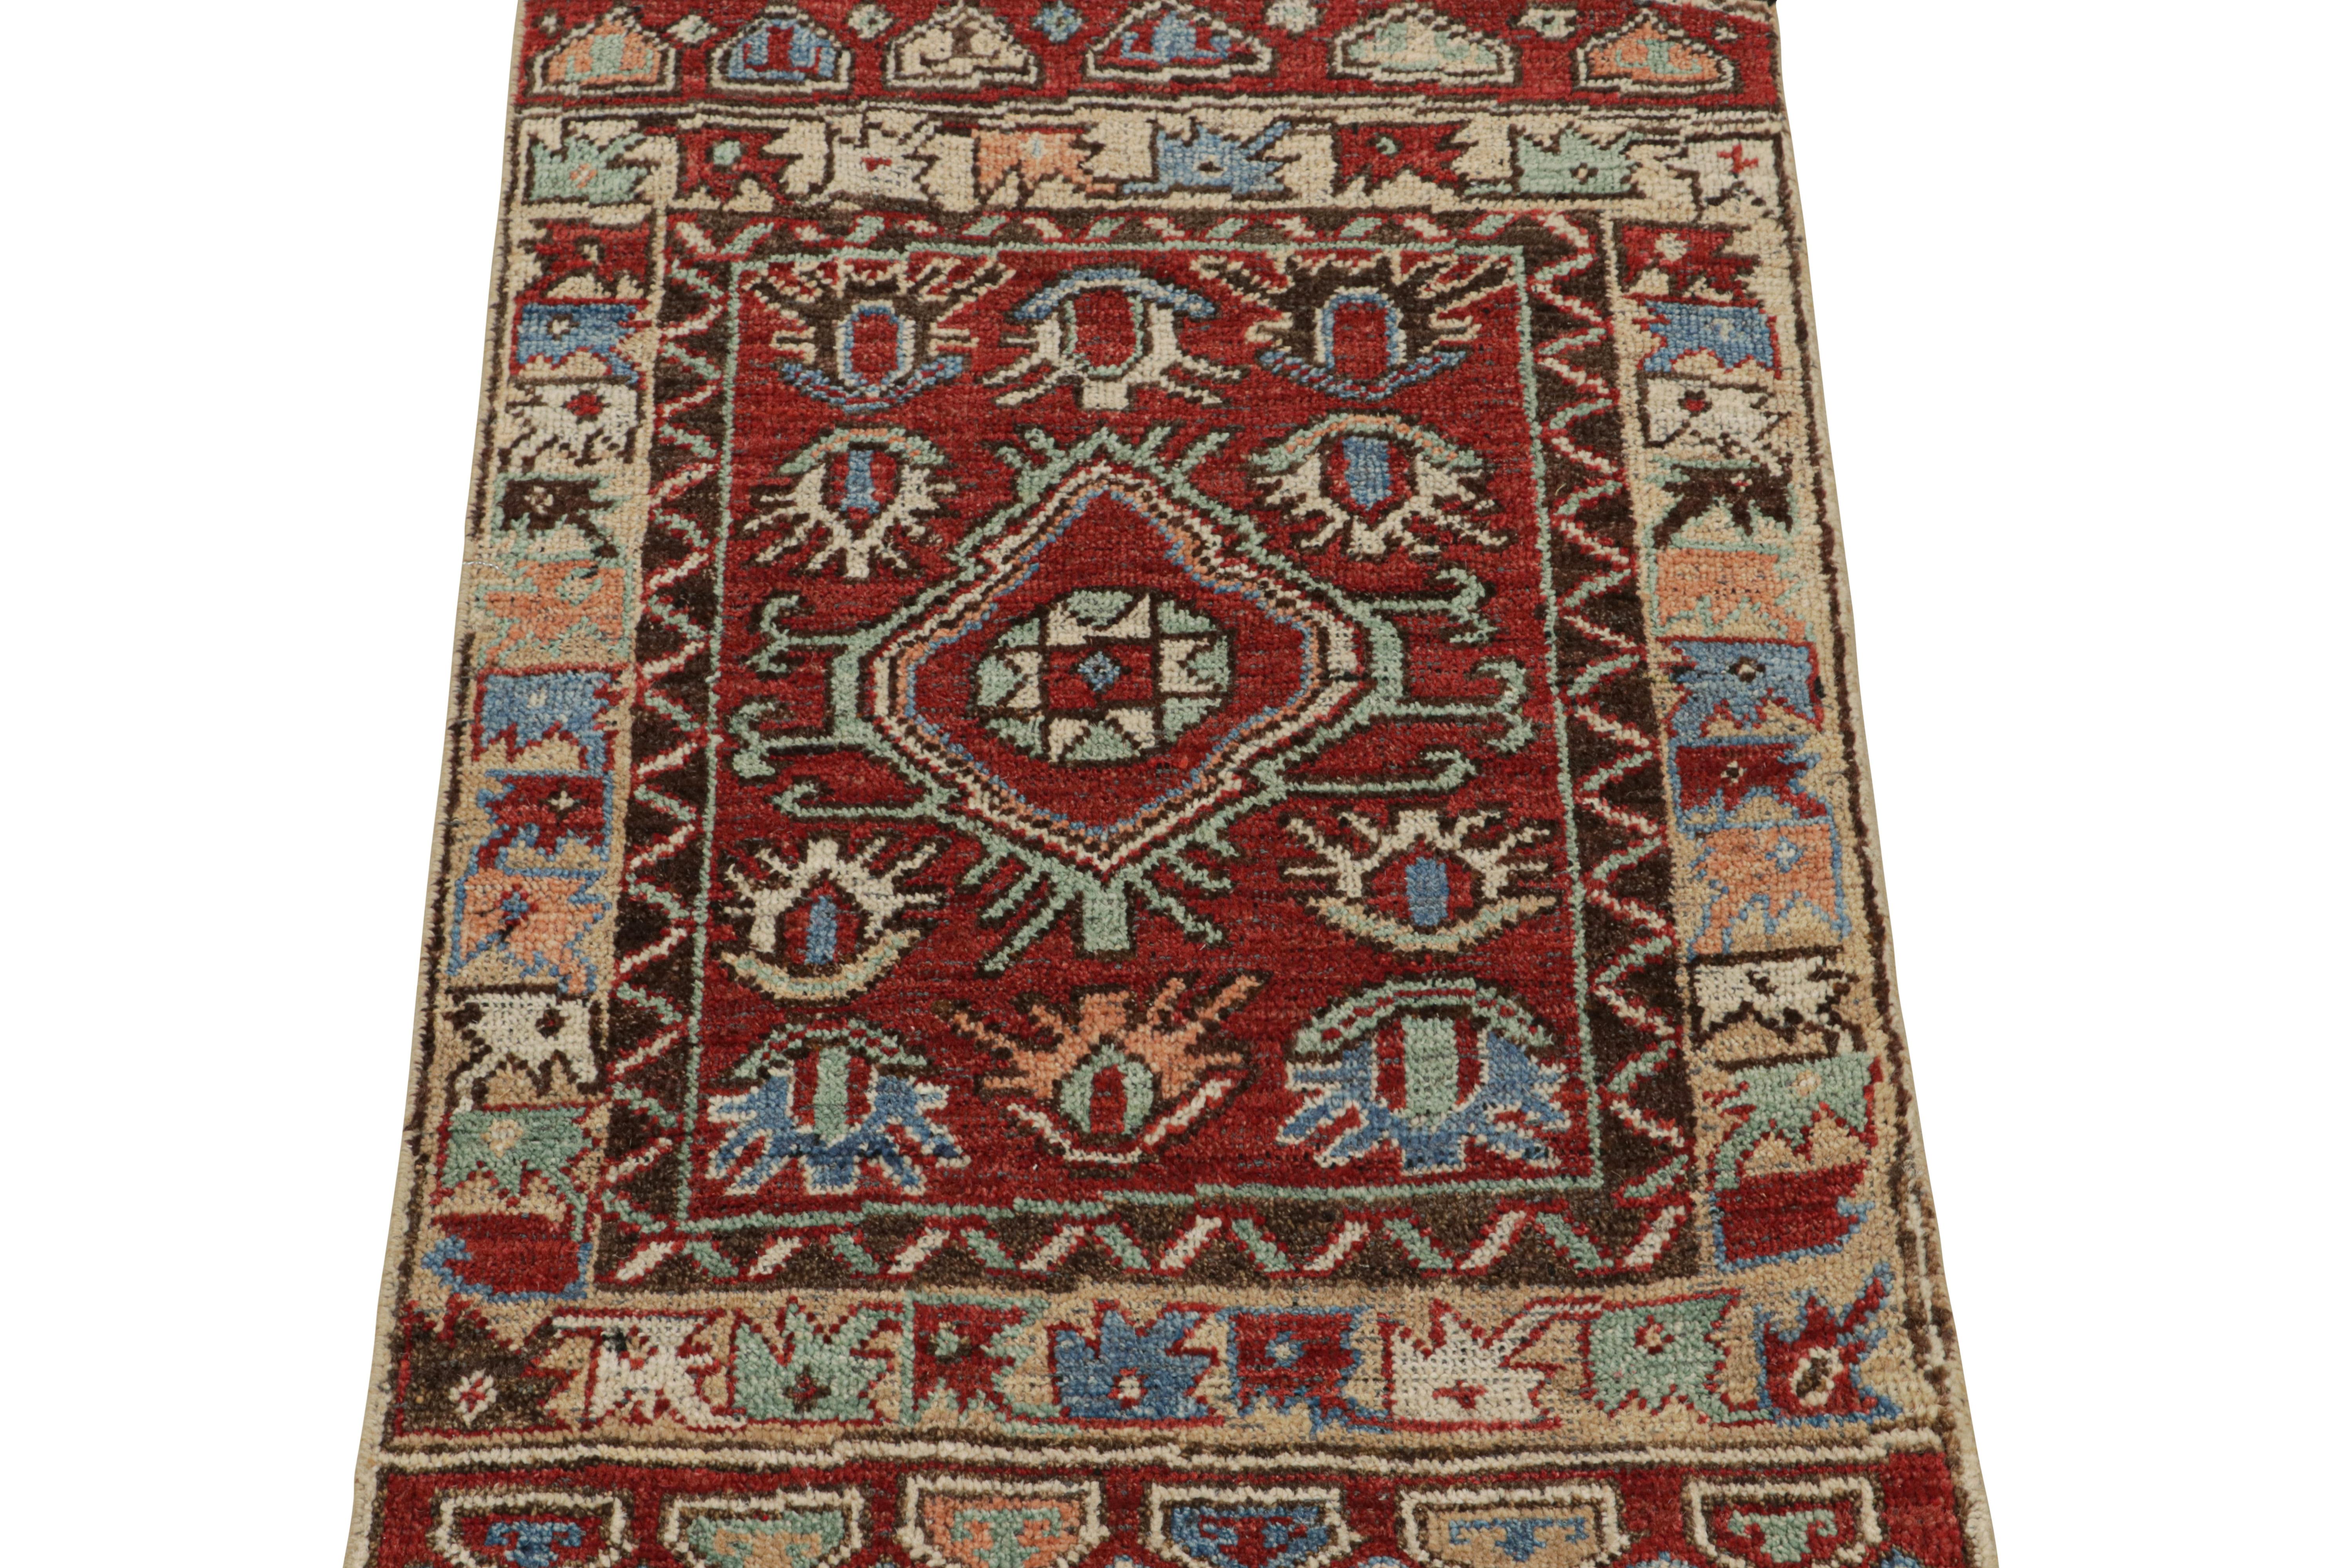 This gift-sized 2x3 rug is a new addition to the custom classics Burano Collection by Rug & Kilim. Hand-knotted in wool, this line explores the most iconic antique rug styles in history with a smart contemporary approach.

On the Design: 

This